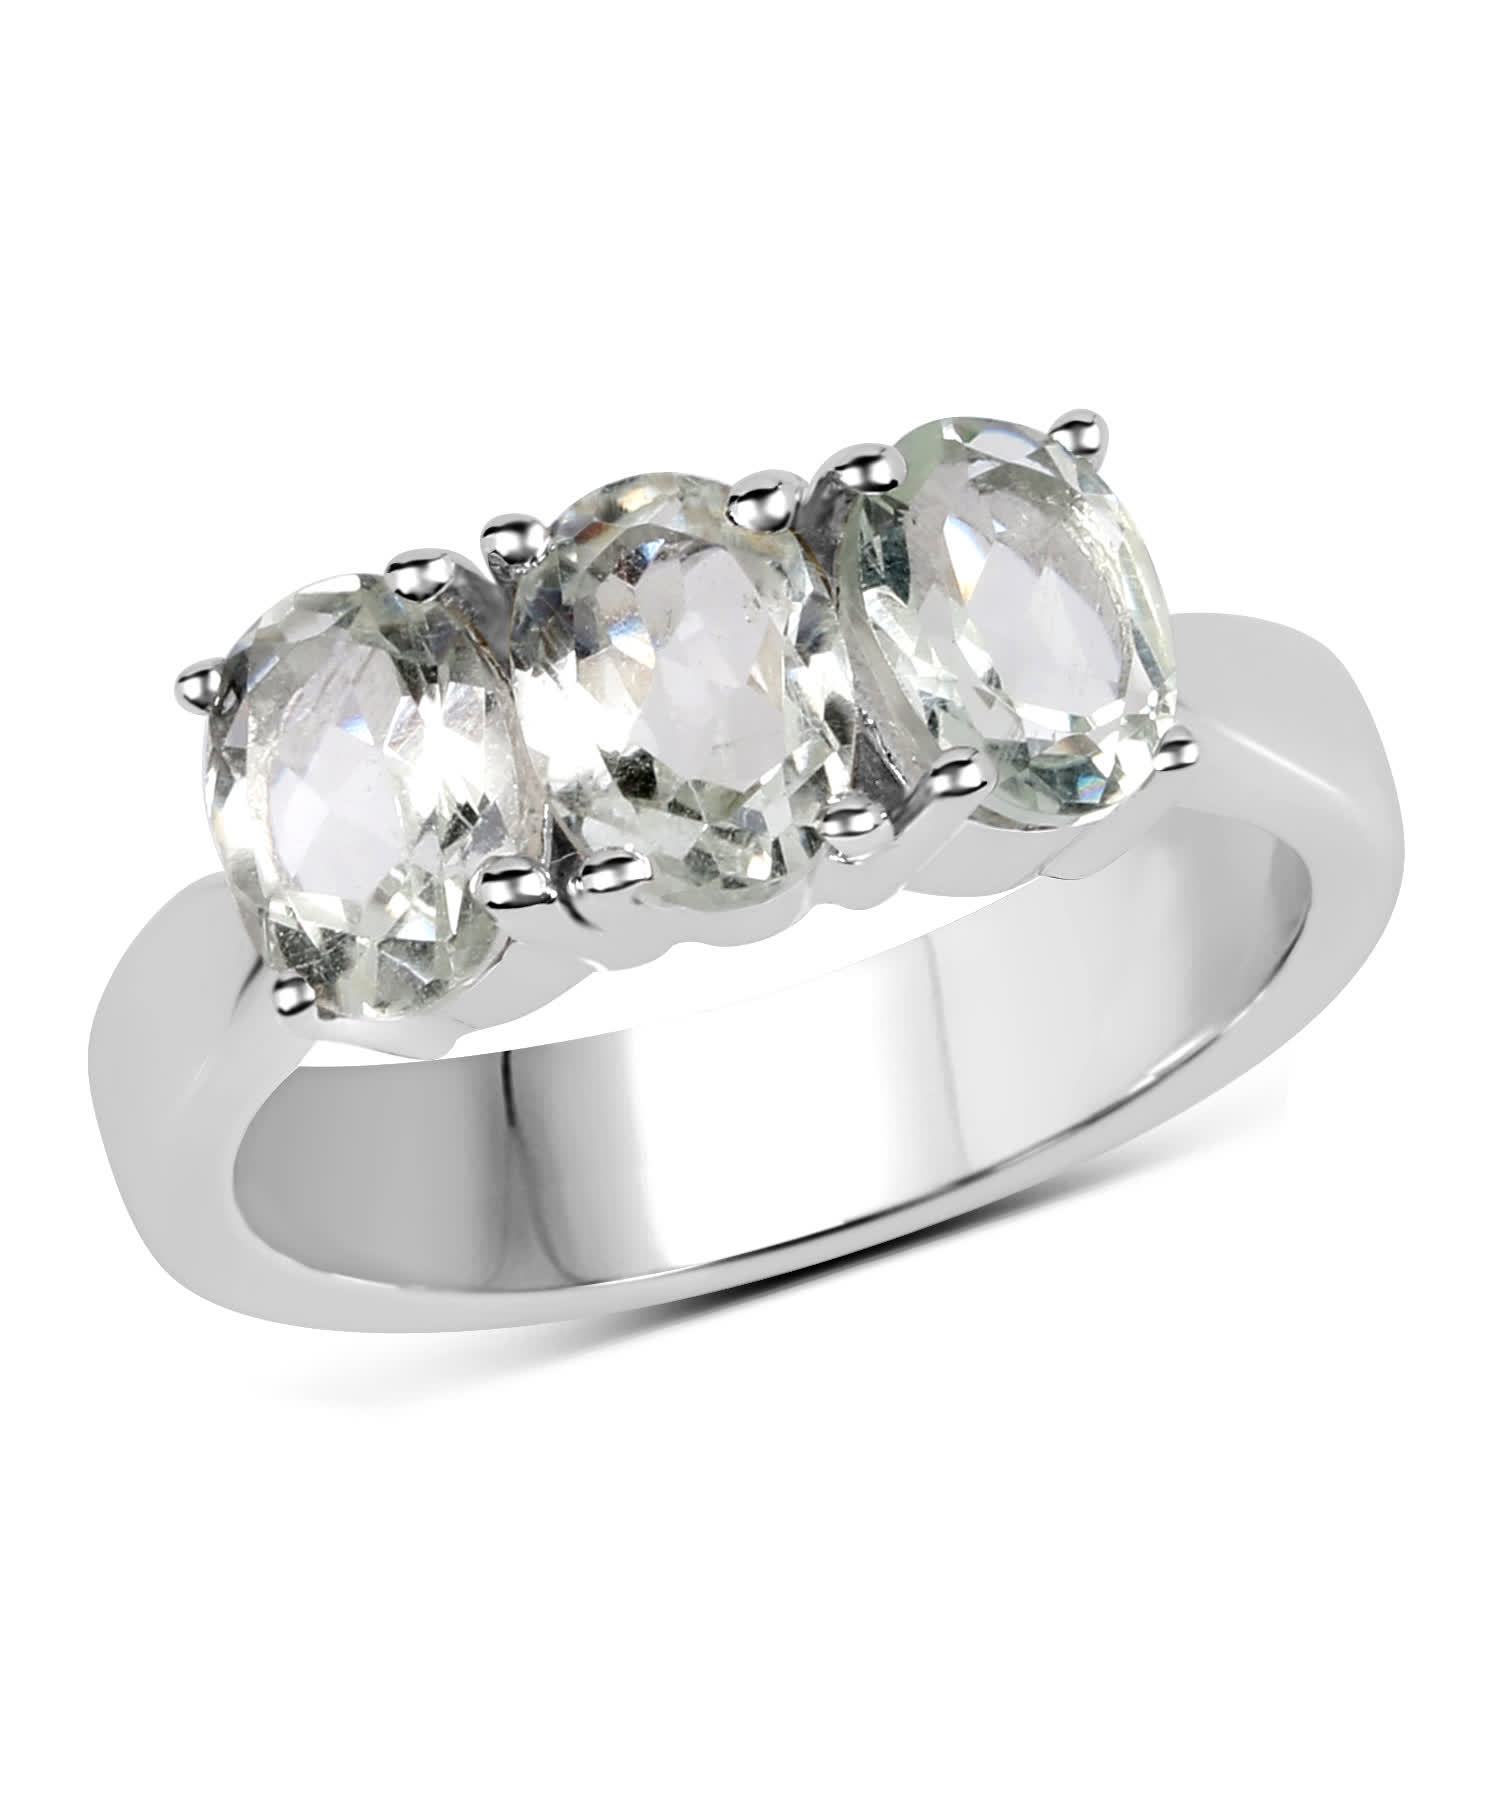 2.40ctw Natural Green Amethyst Rhodium Plated 925 Sterling Silver Three-Stone Ring View 1